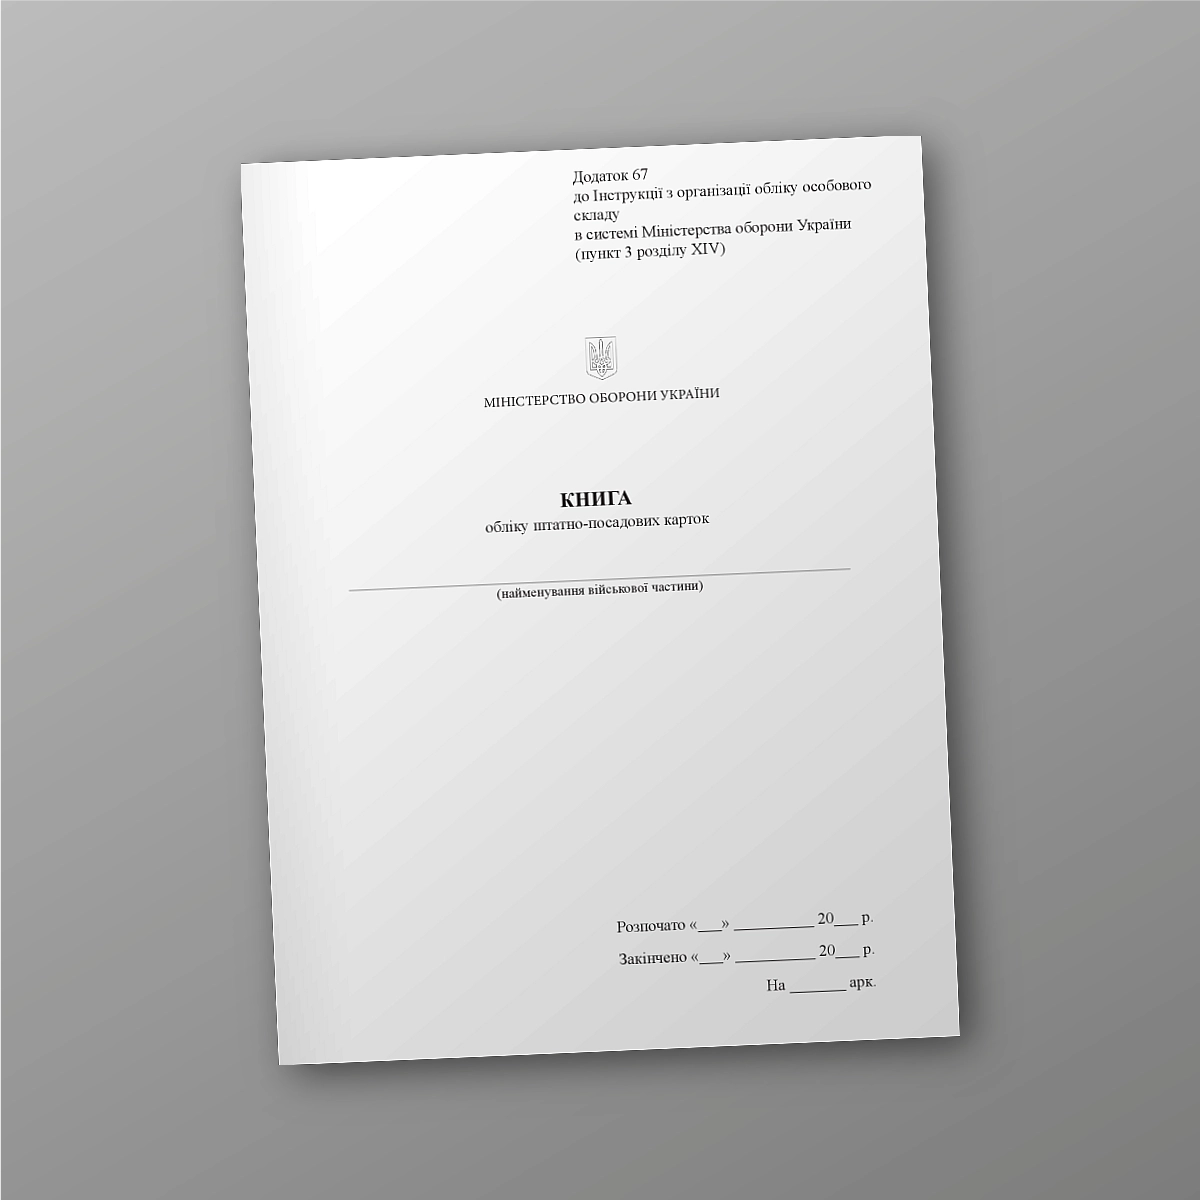 Accounting book of staff and position cards | PrintTo: